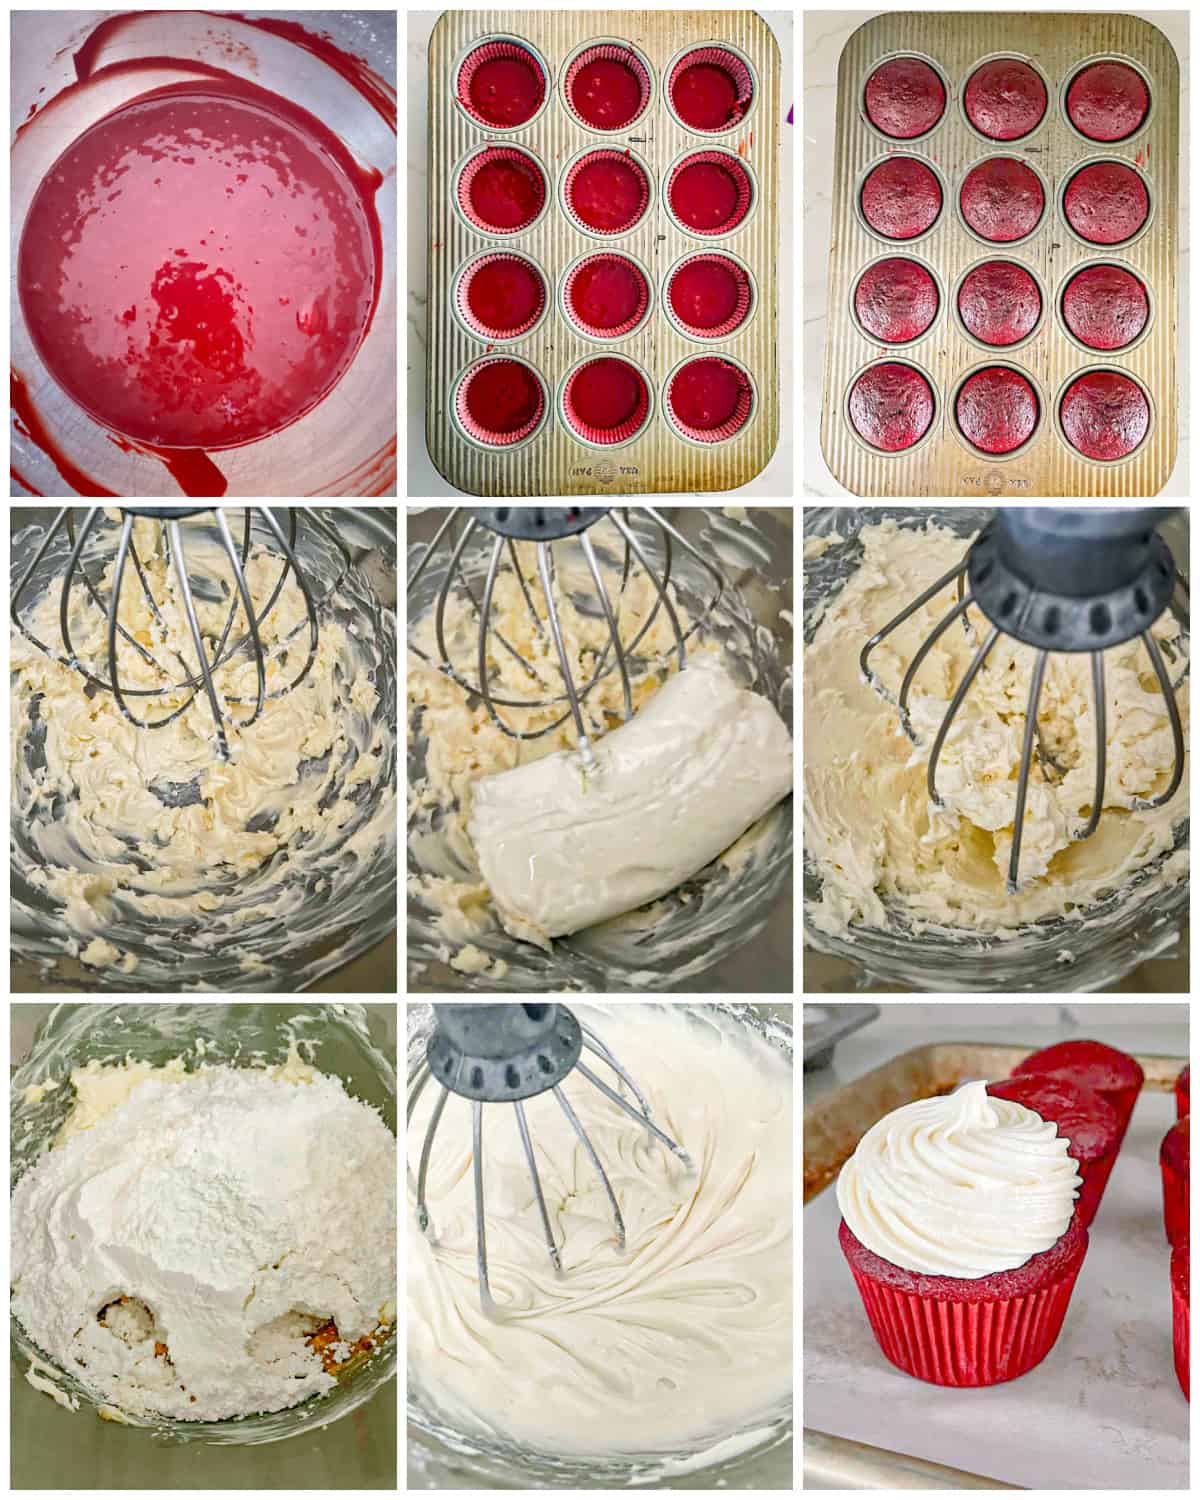 tutuorial for red velvet with cream cheese frosting recipe